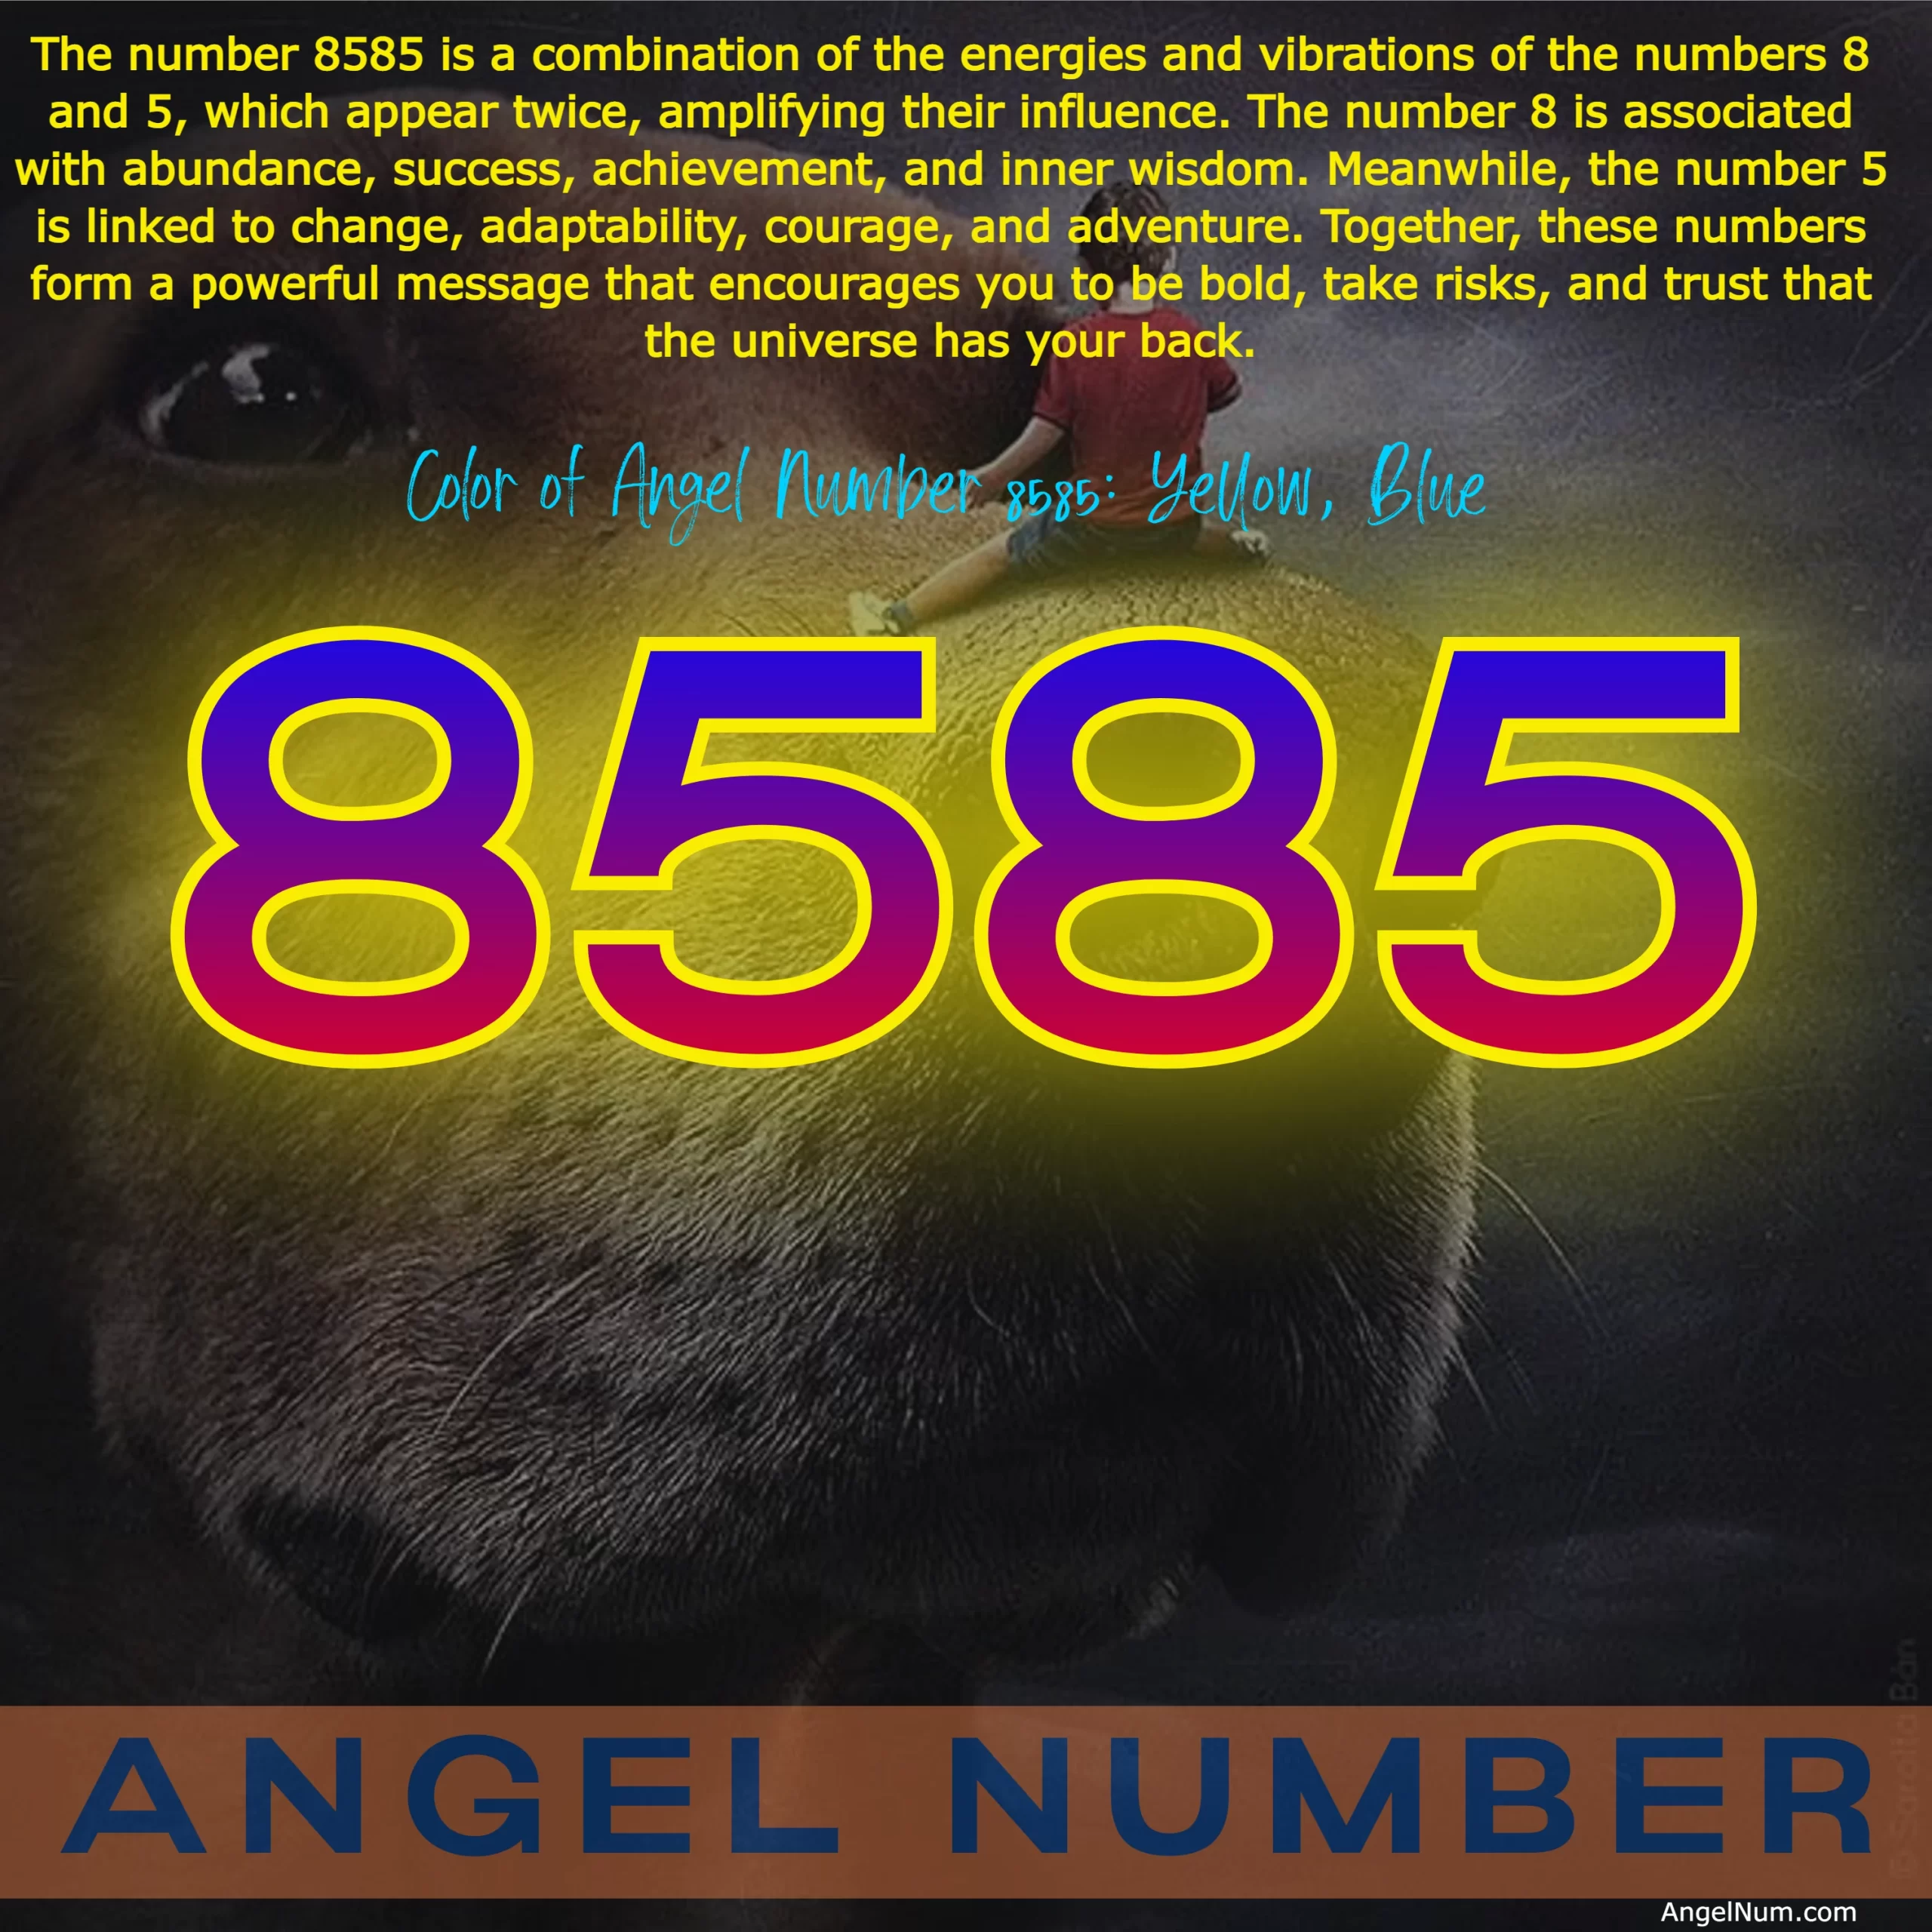 Angel Number 8585: Meaning, Symbolism, and Significance